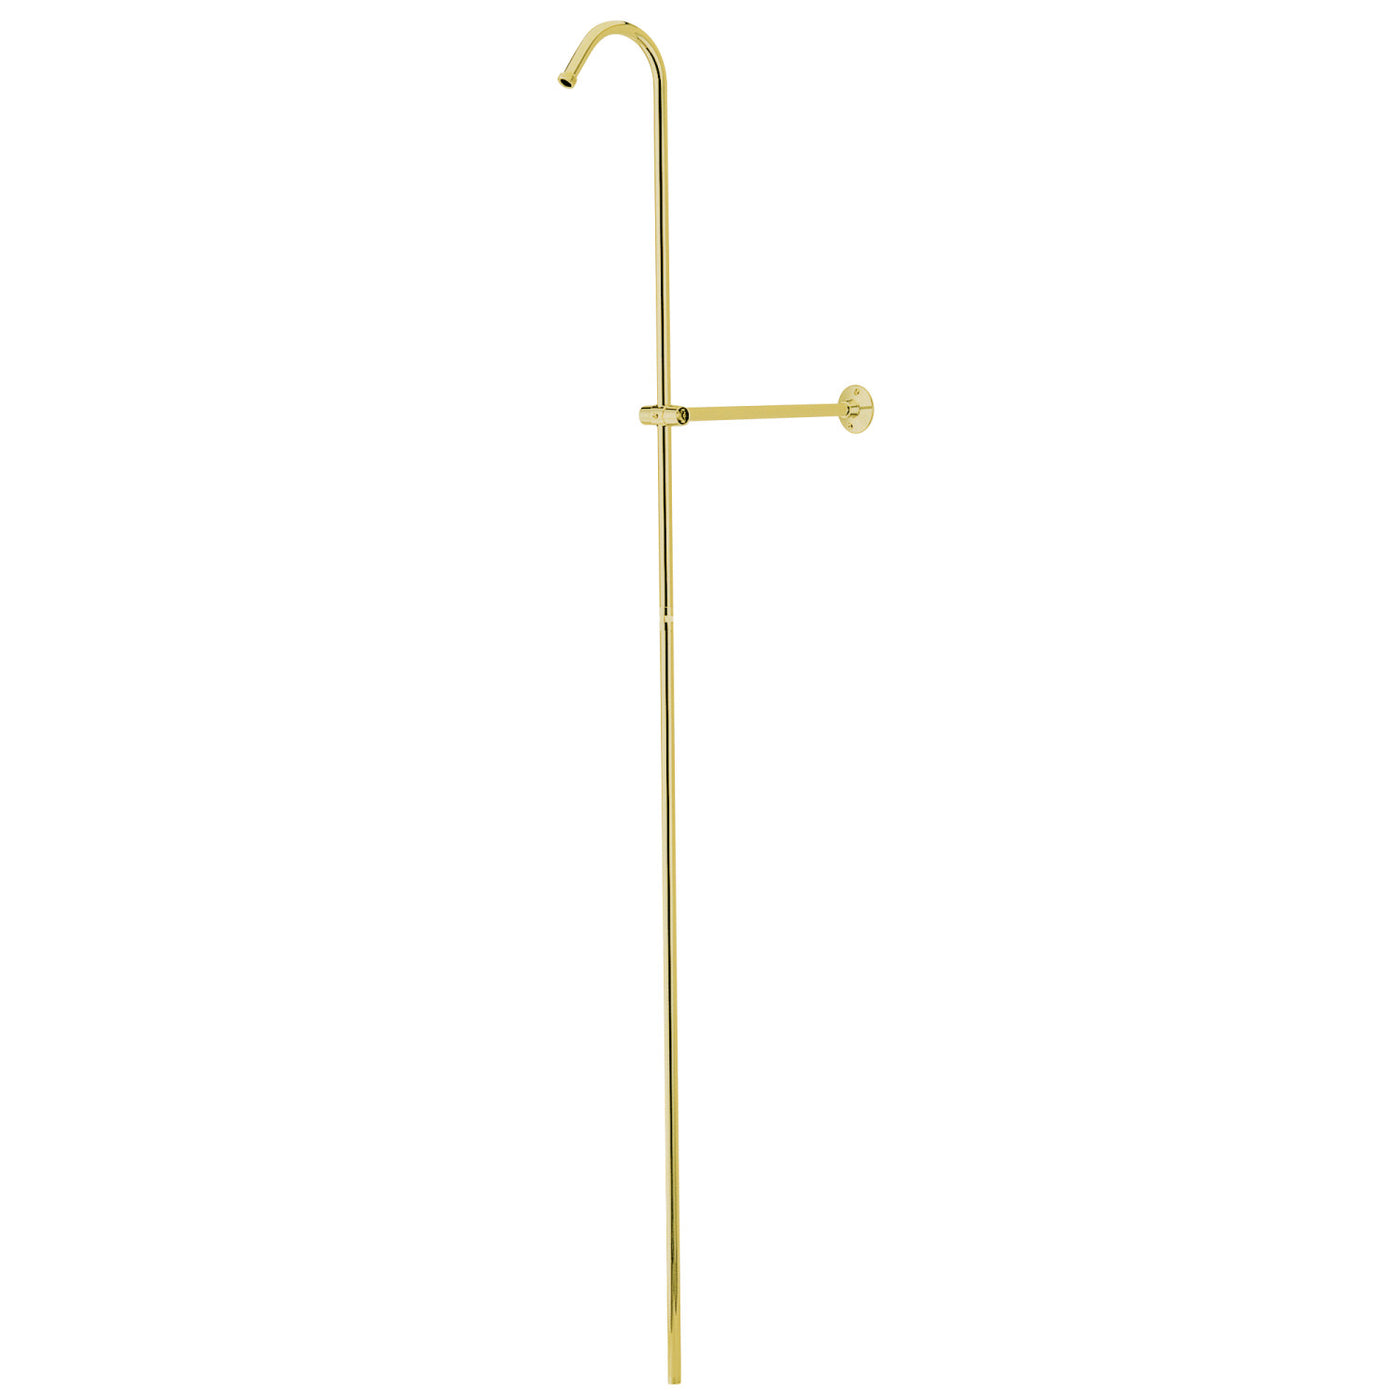 Elements of Design EDR602 Shower Riser and Wall Support, Polished Brass